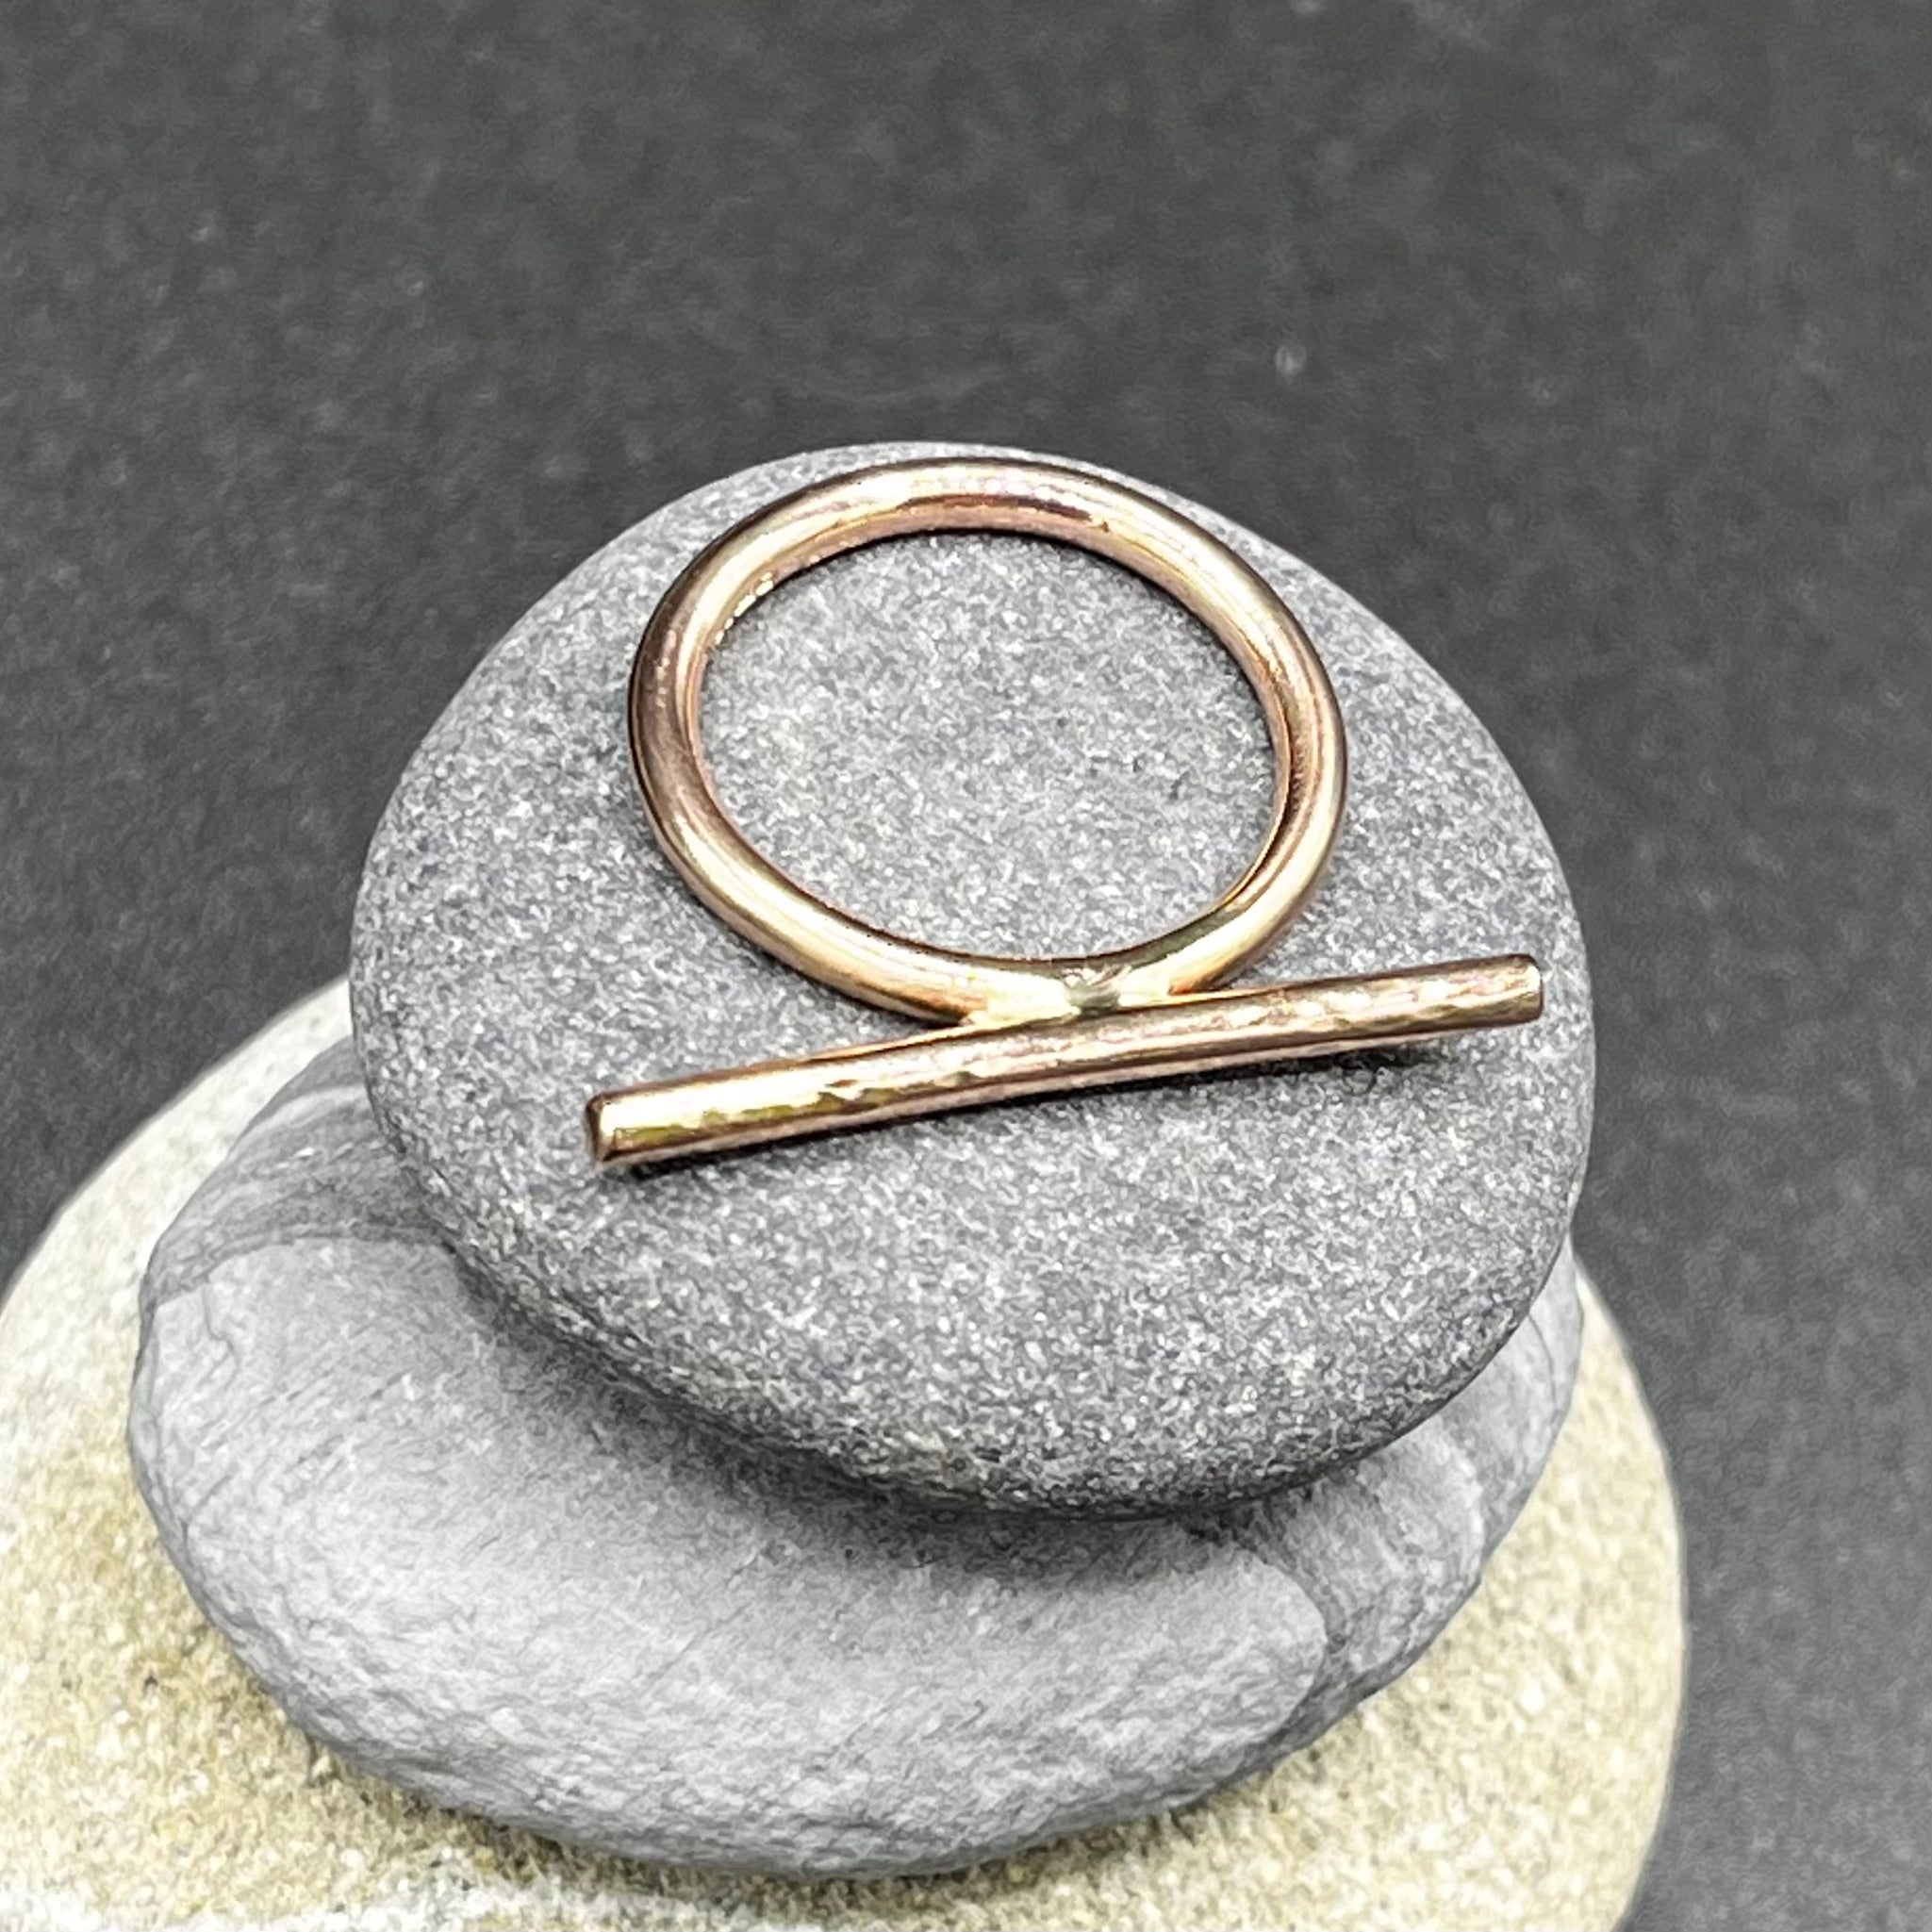 9ct red gold ring. 'T' bar design ring design 2mm hammered bar and polished round wire shank.